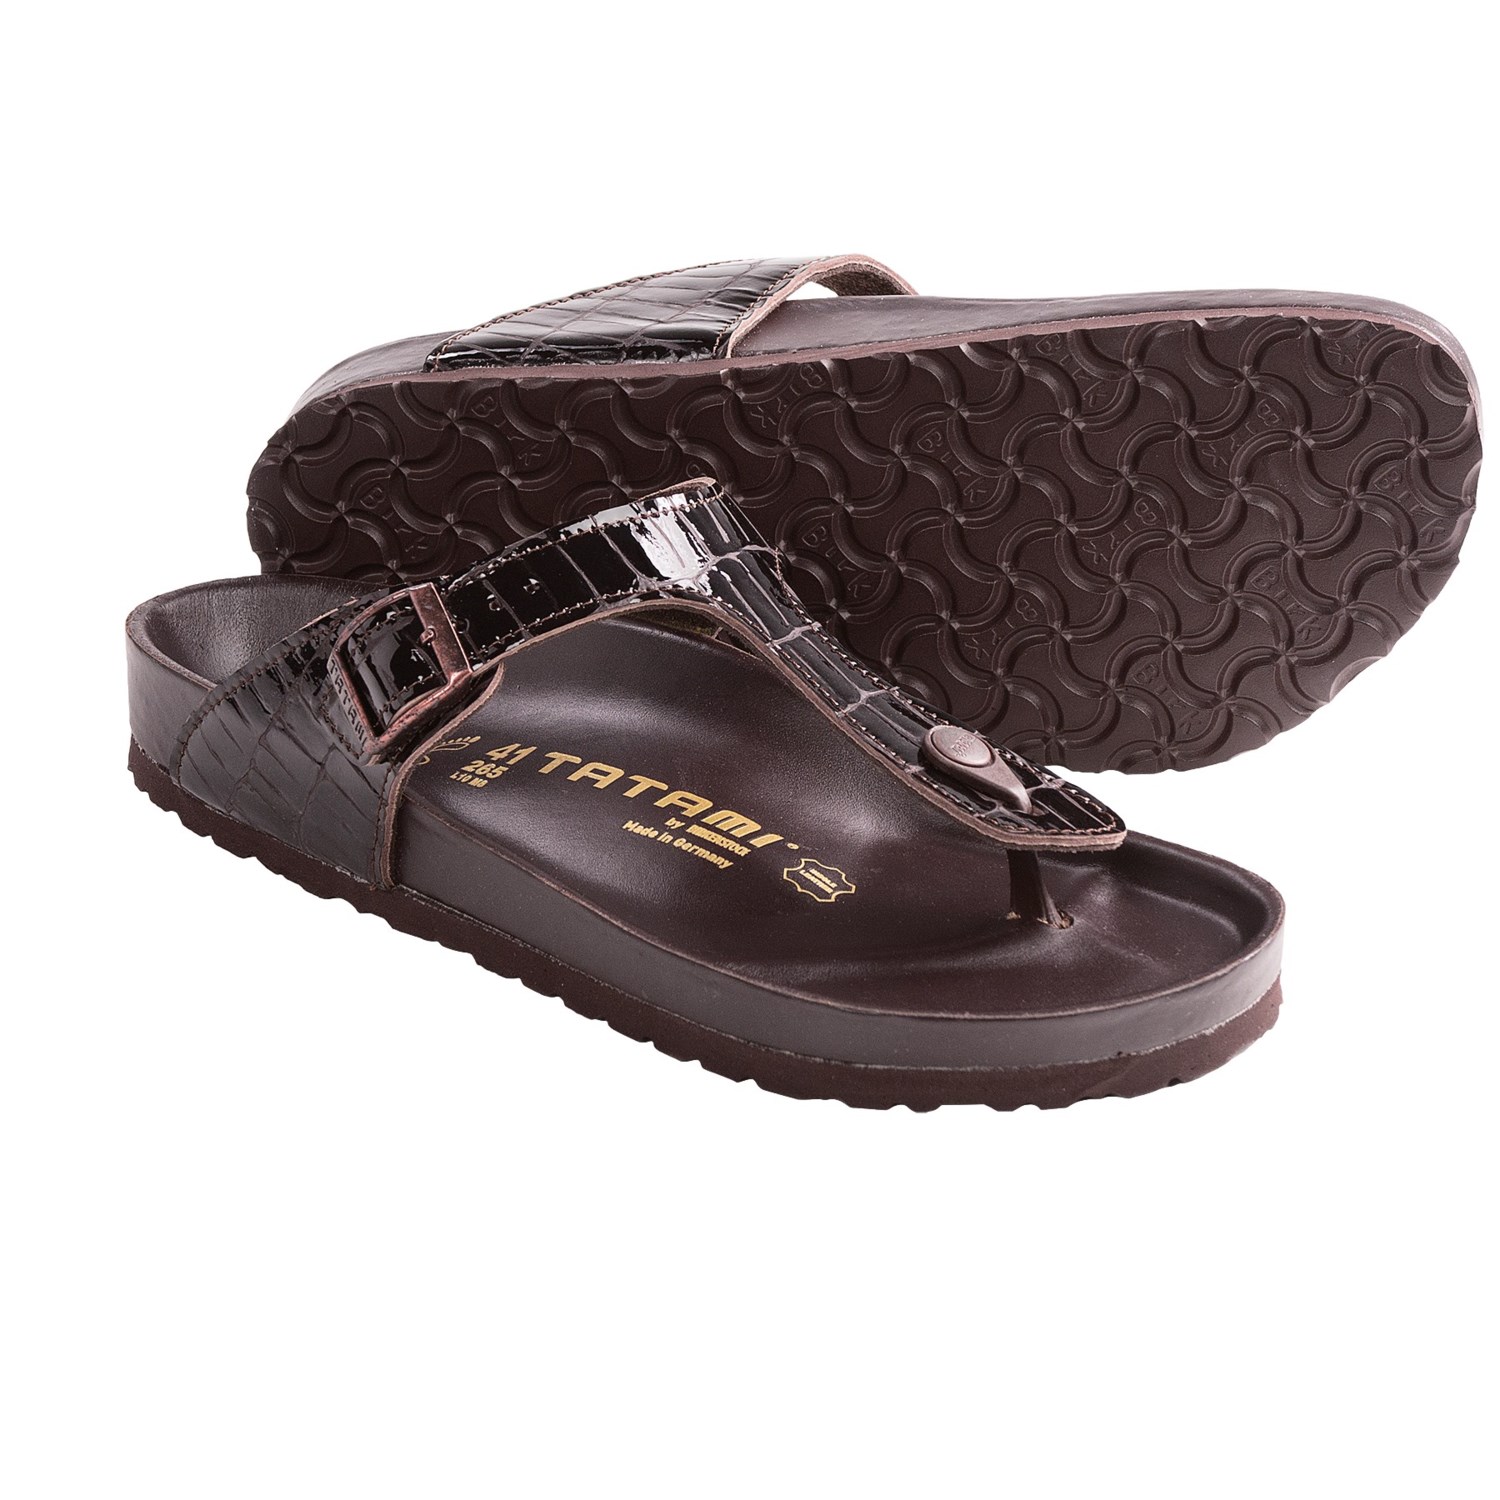 Tatami by Birkenstock Gizeh Croco Sandals - Leather (For Women) - Save ...